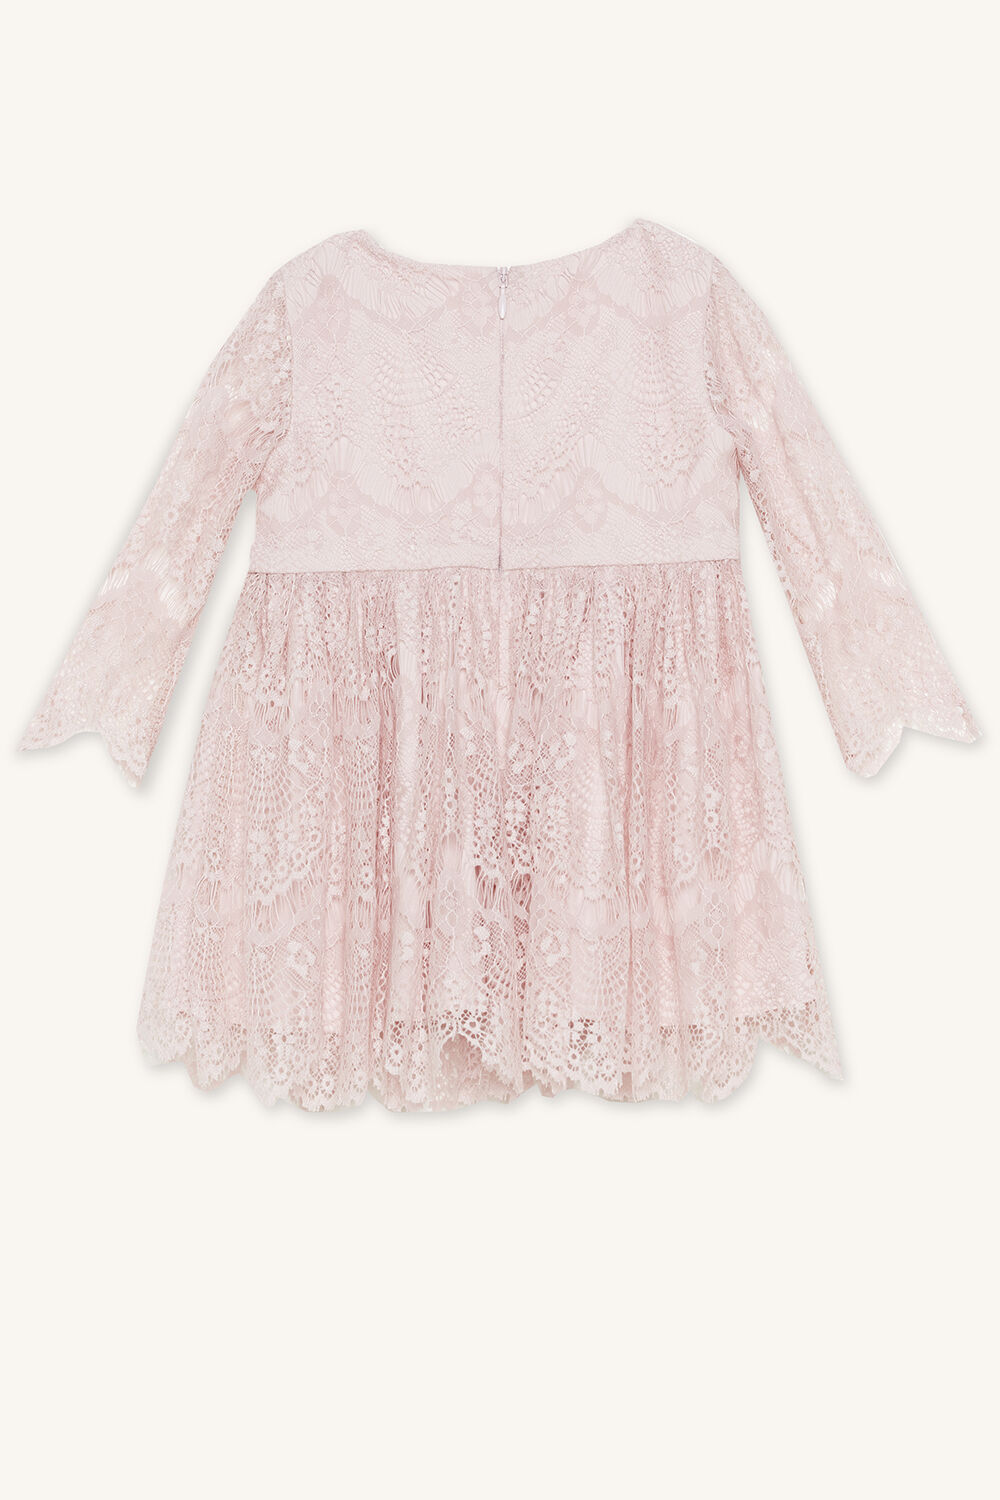 BABY GIRL GERTRUDE LACE DRESS in colour POTPOURRI